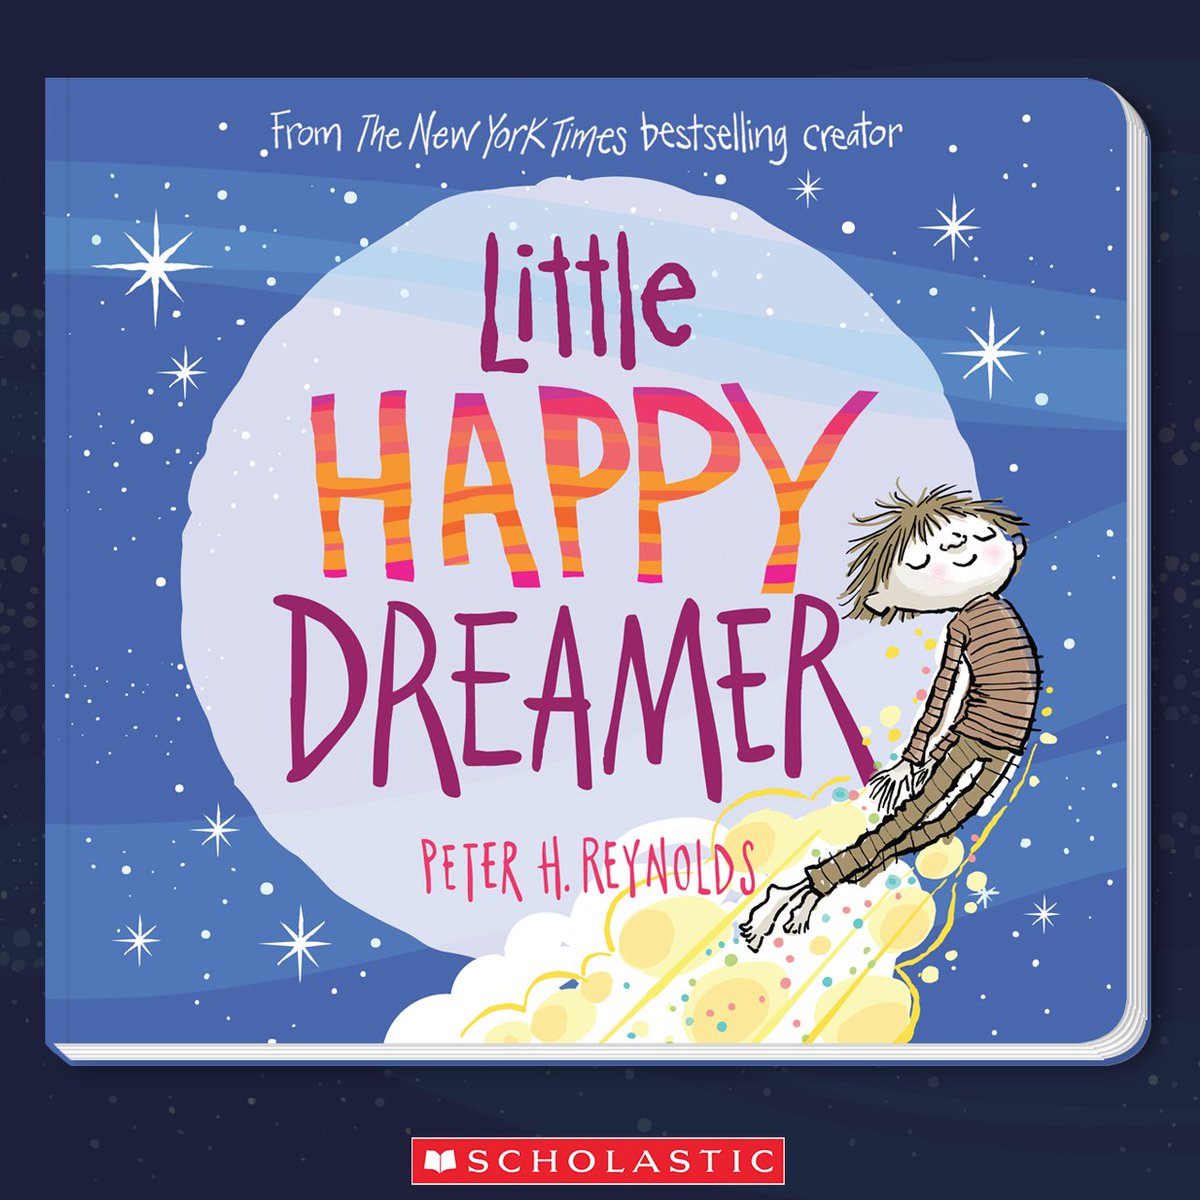 The positive lessons and playful storytelling in each of @peterhreynolds' books are designed to empower children to face the world with kindness, confidence, and community. Add these uplifting reads to your library today! bit.ly/46lEHP2